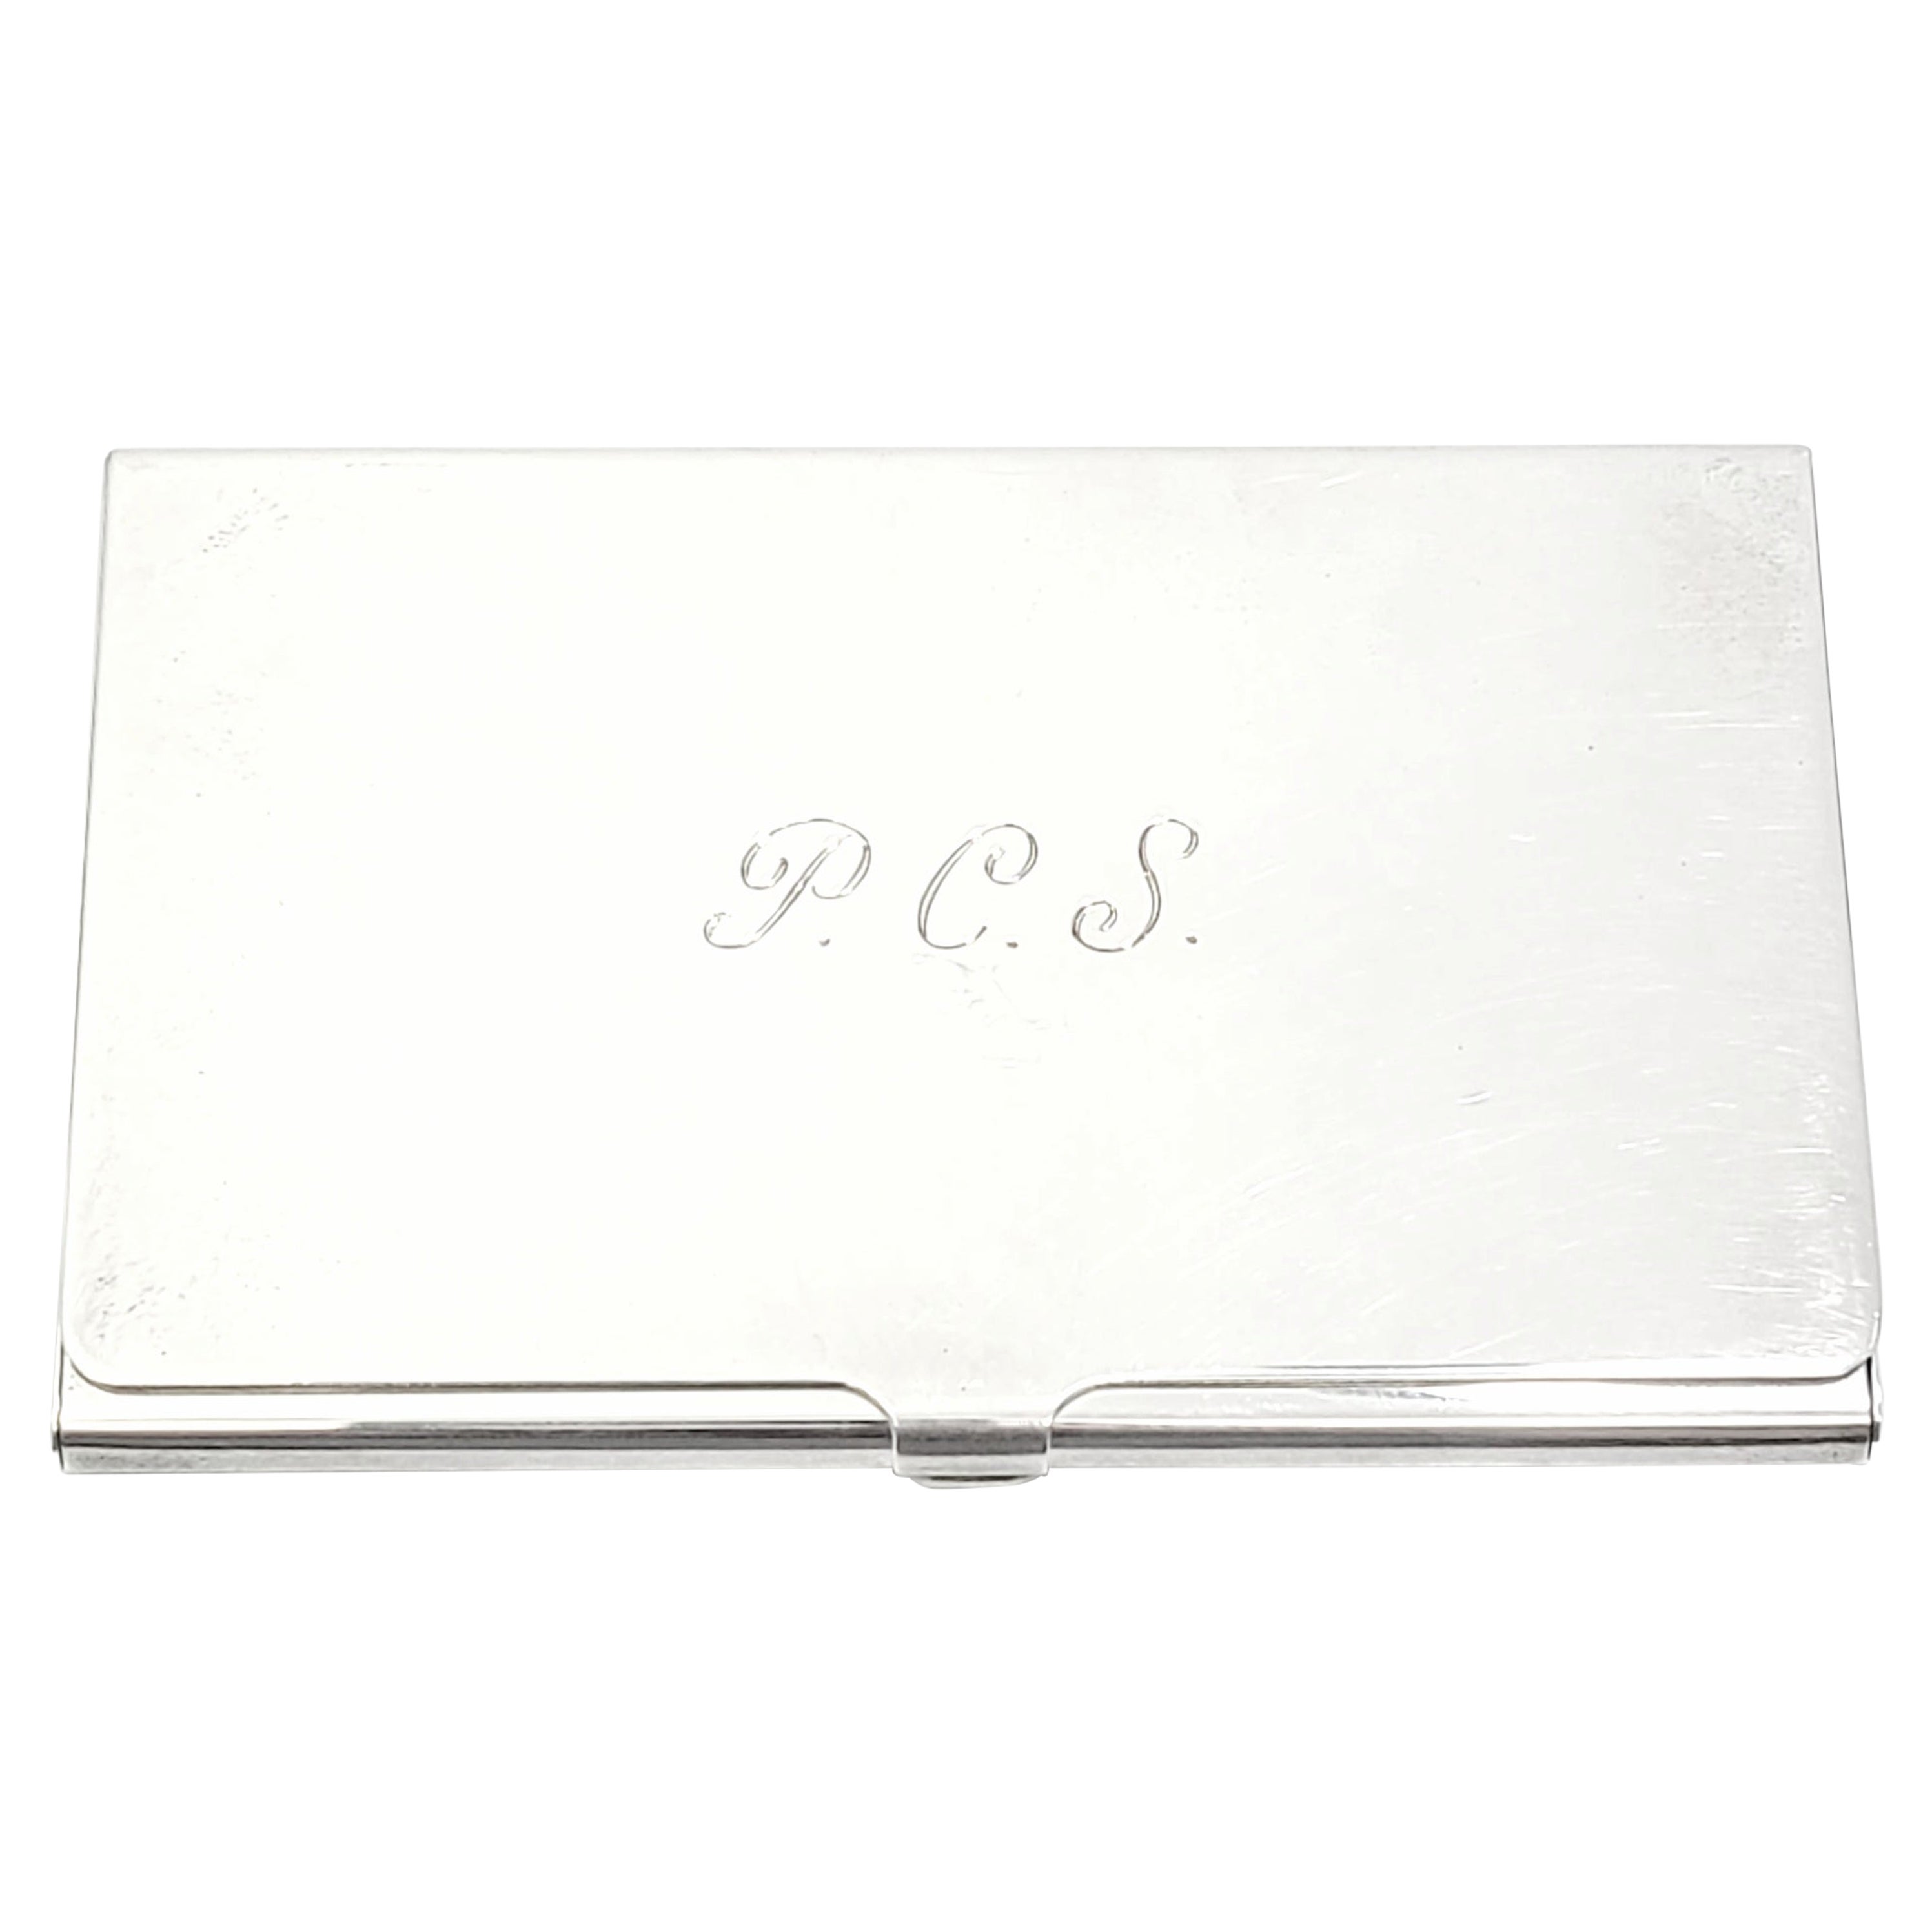 Tiffany & Co Sterling Silver Card Holder with Monogram